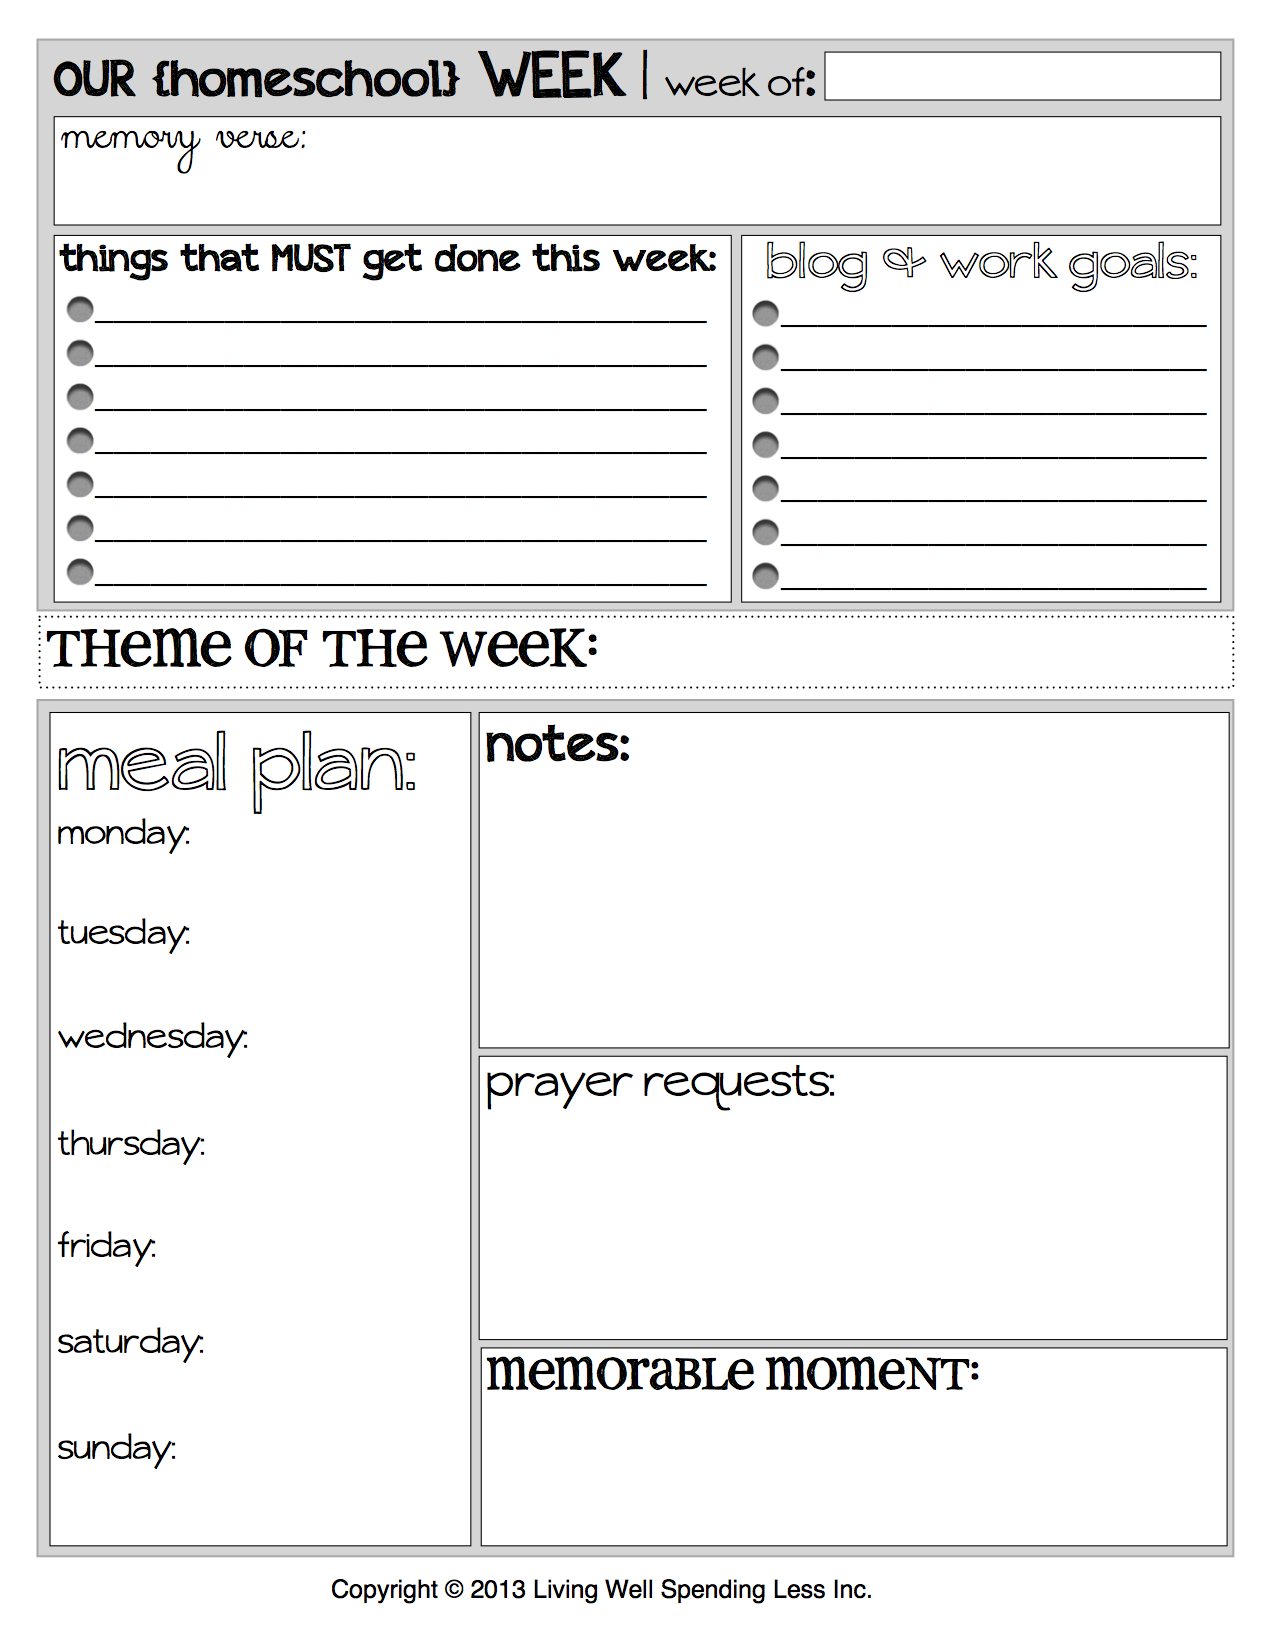 homeschool-planning-resources-free-printable-planning-pages-my-joy